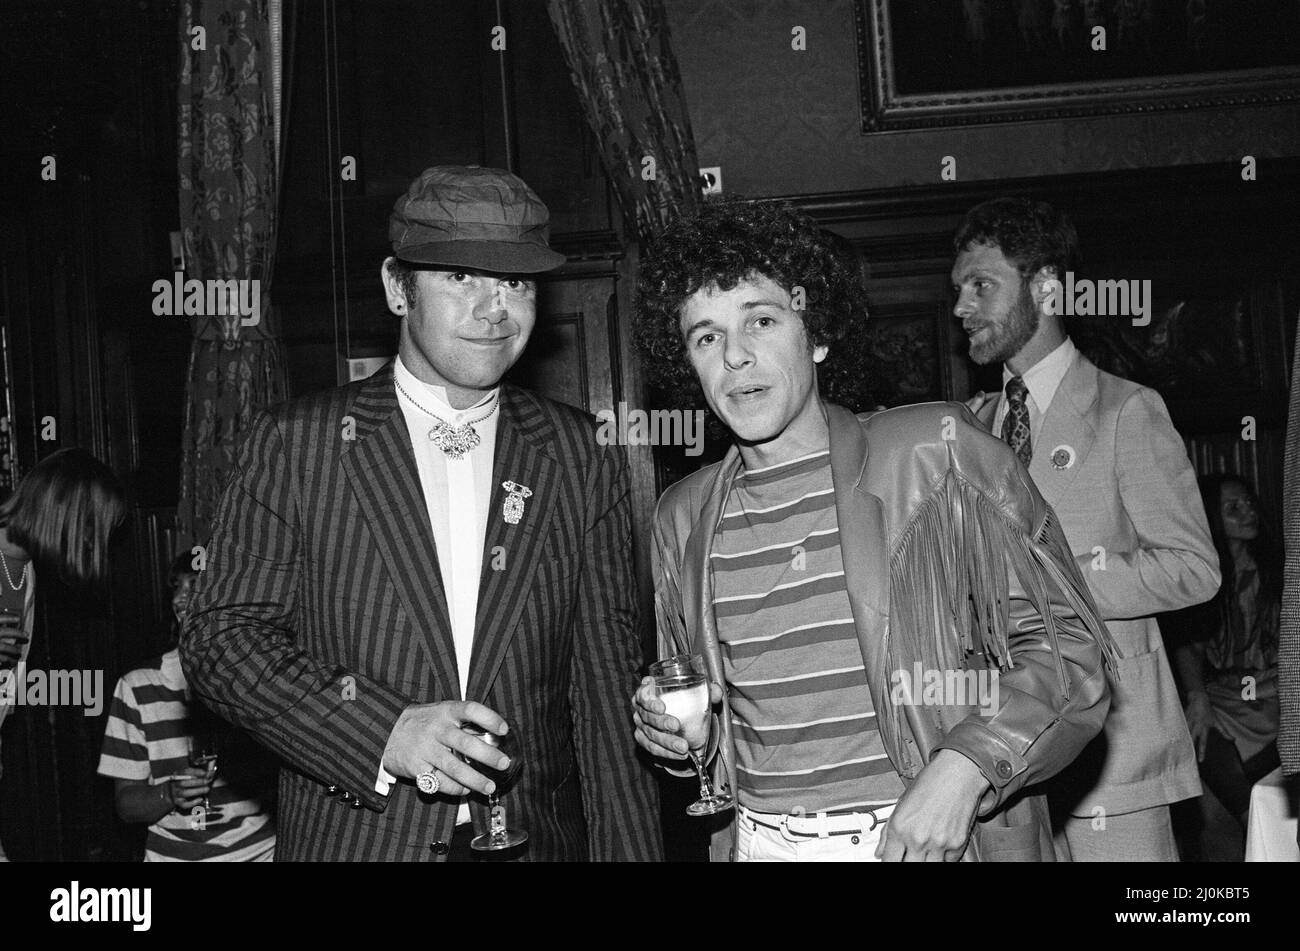 Elton John and Leo Sayer attending a House of Commons reception, invited along with other pop stars by the Minister for the Arts, Norman St John-Stevas. 3rd August 1980. Stock Photo